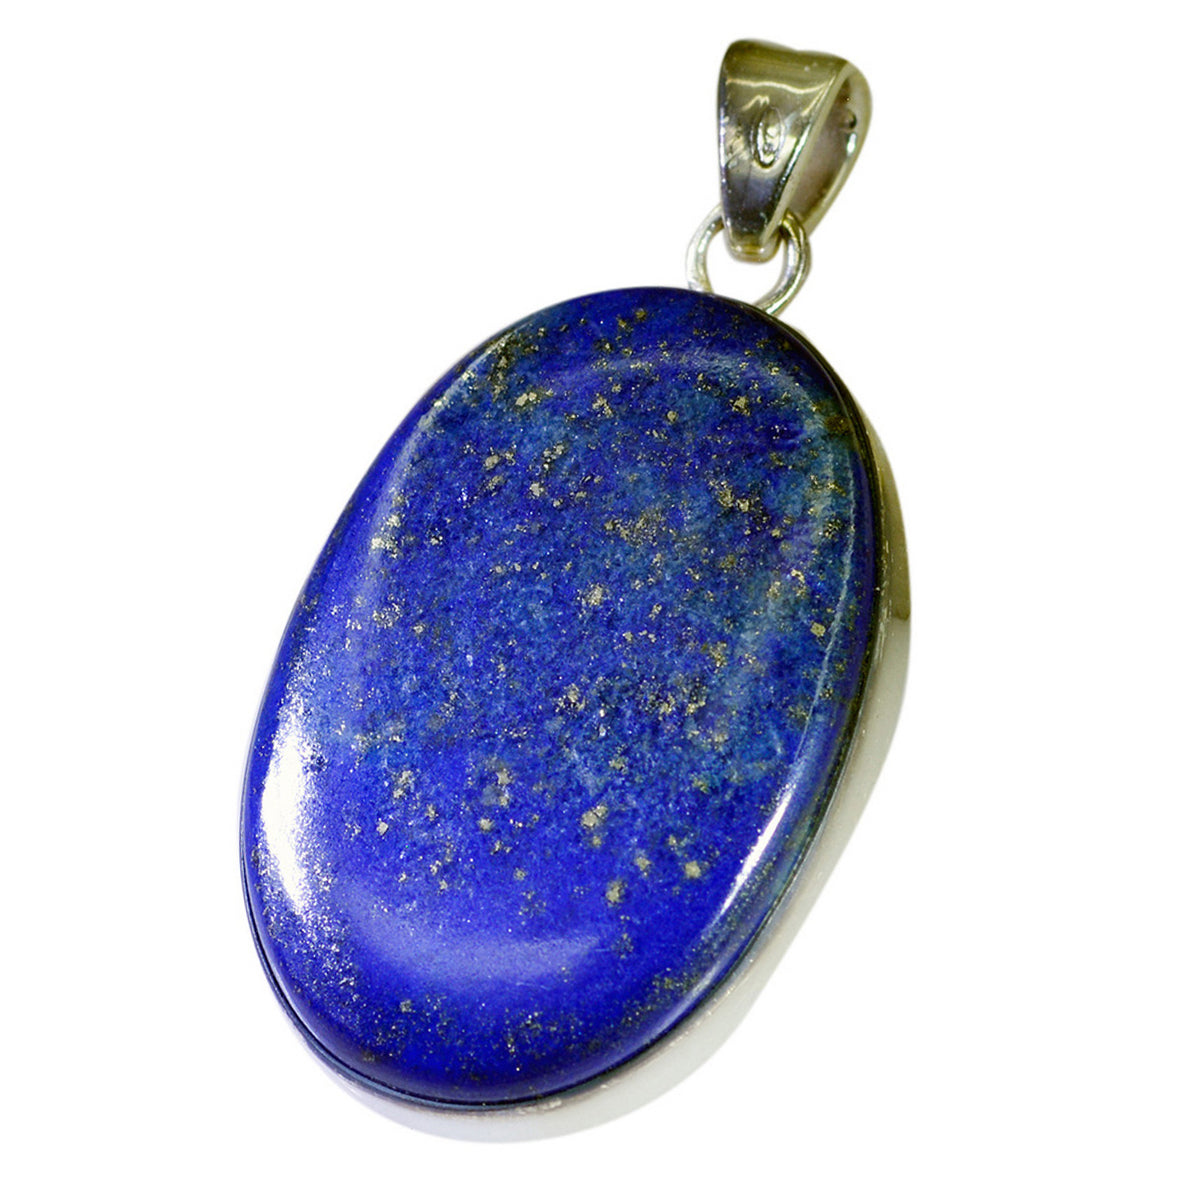 Riyo Natural Gemstone Oval Cabochon Nevy Blue Lapis Lazuli 925 Sterling Silver Pendant gift for teacher's day